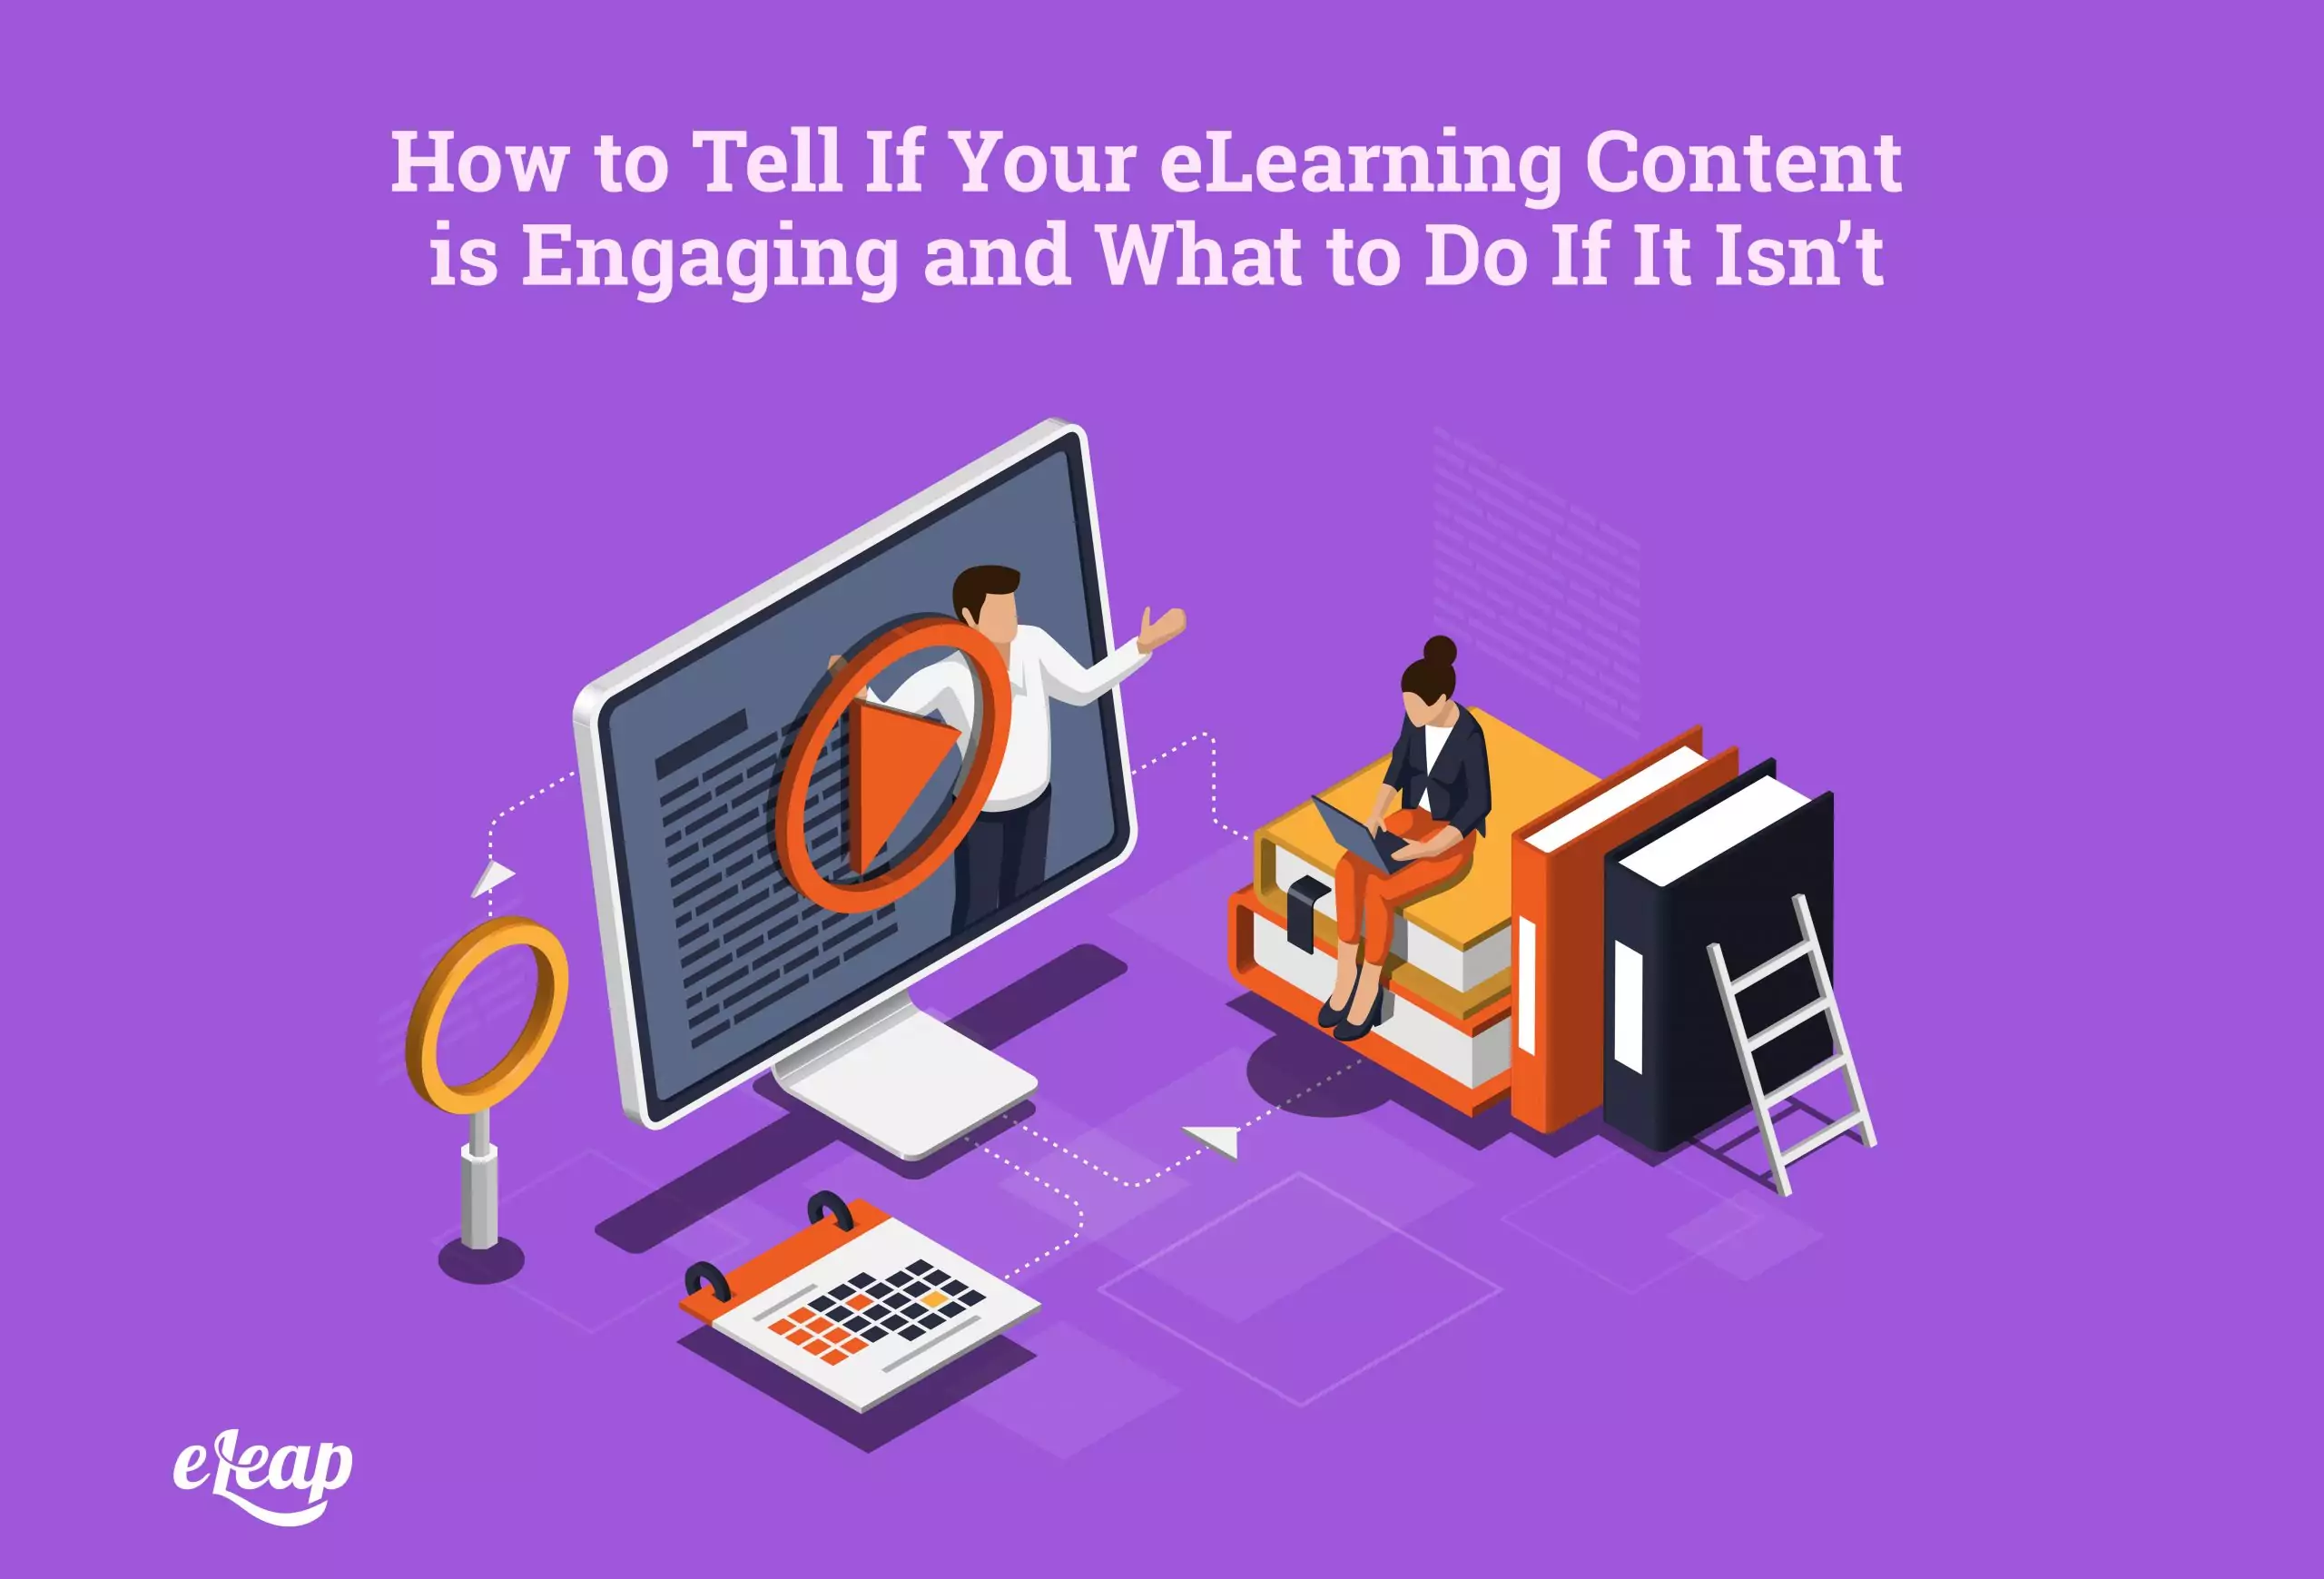 How to Tell If Your eLearning Content is Engaging and What to Do If It Isn’t